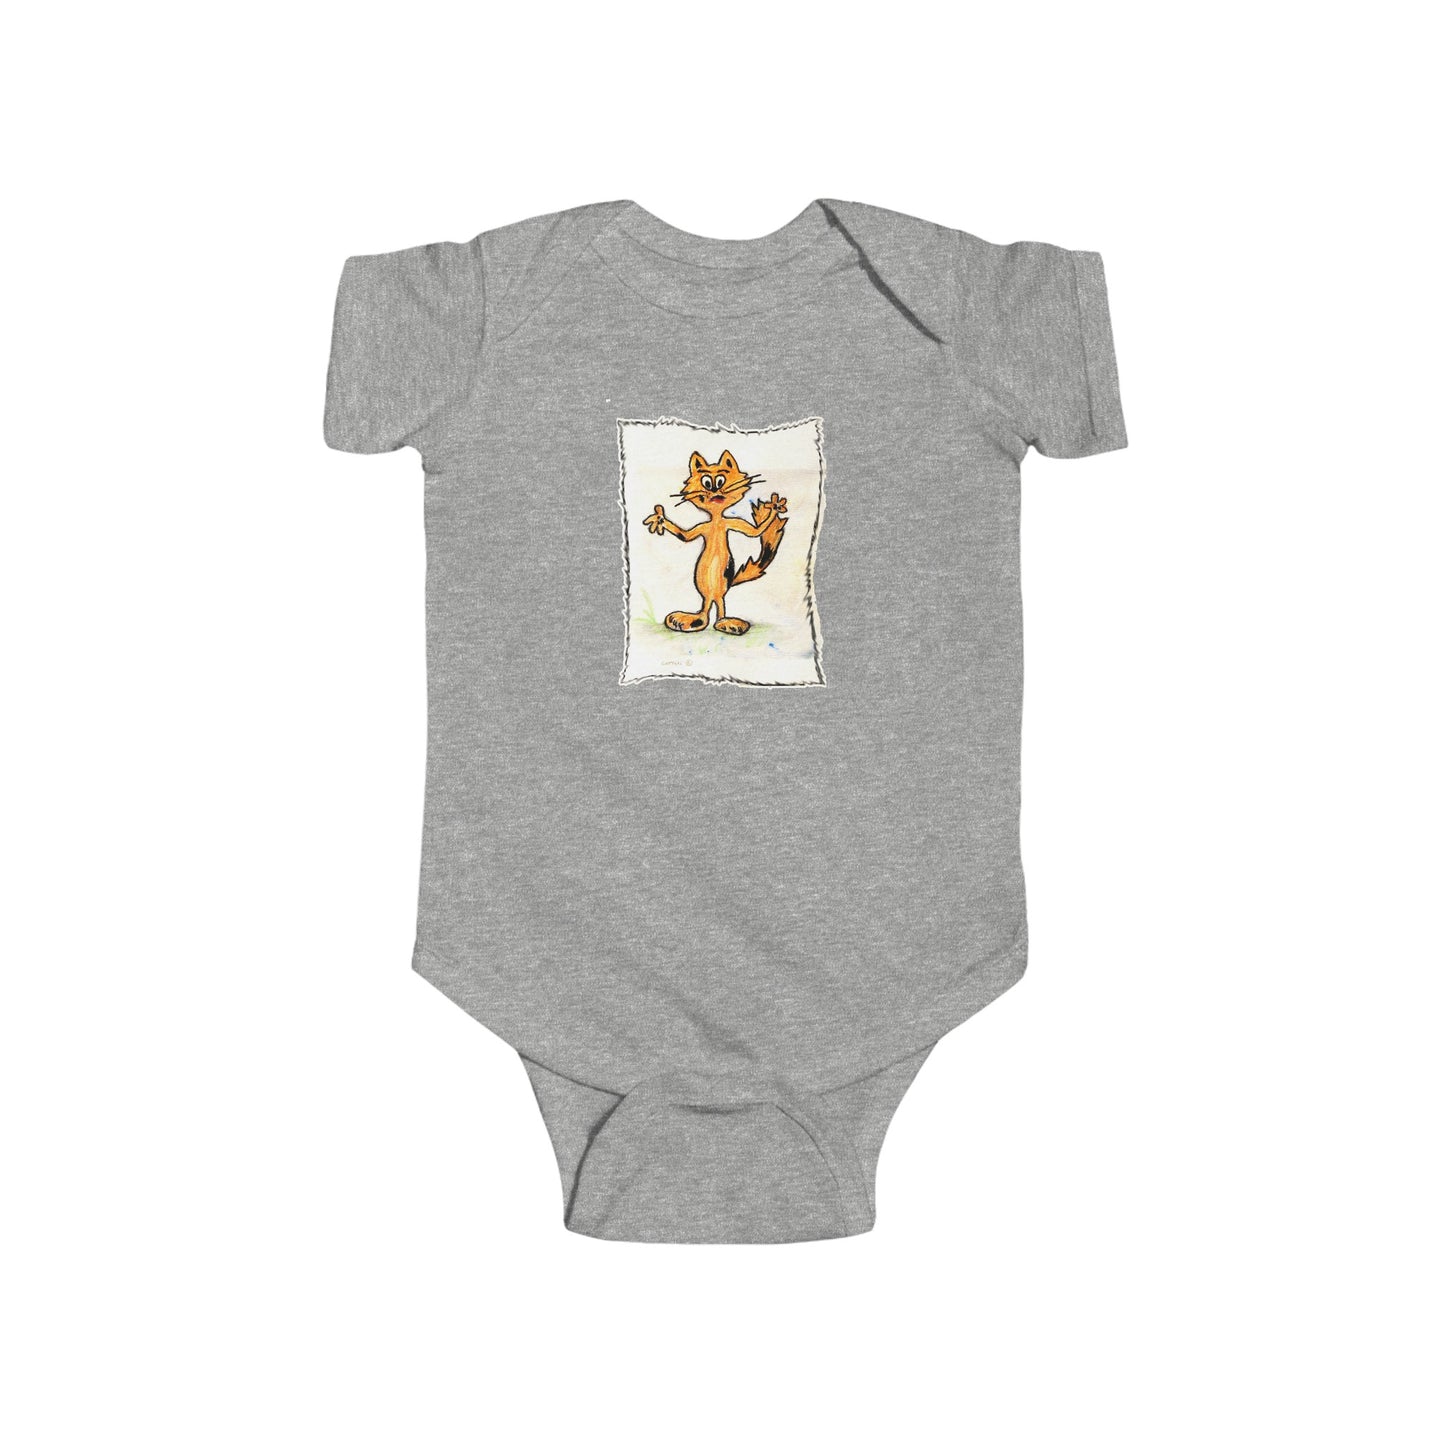 Infant Fine Jersey Bodysuit - Cattoli the Cat ** name can be personalized.**